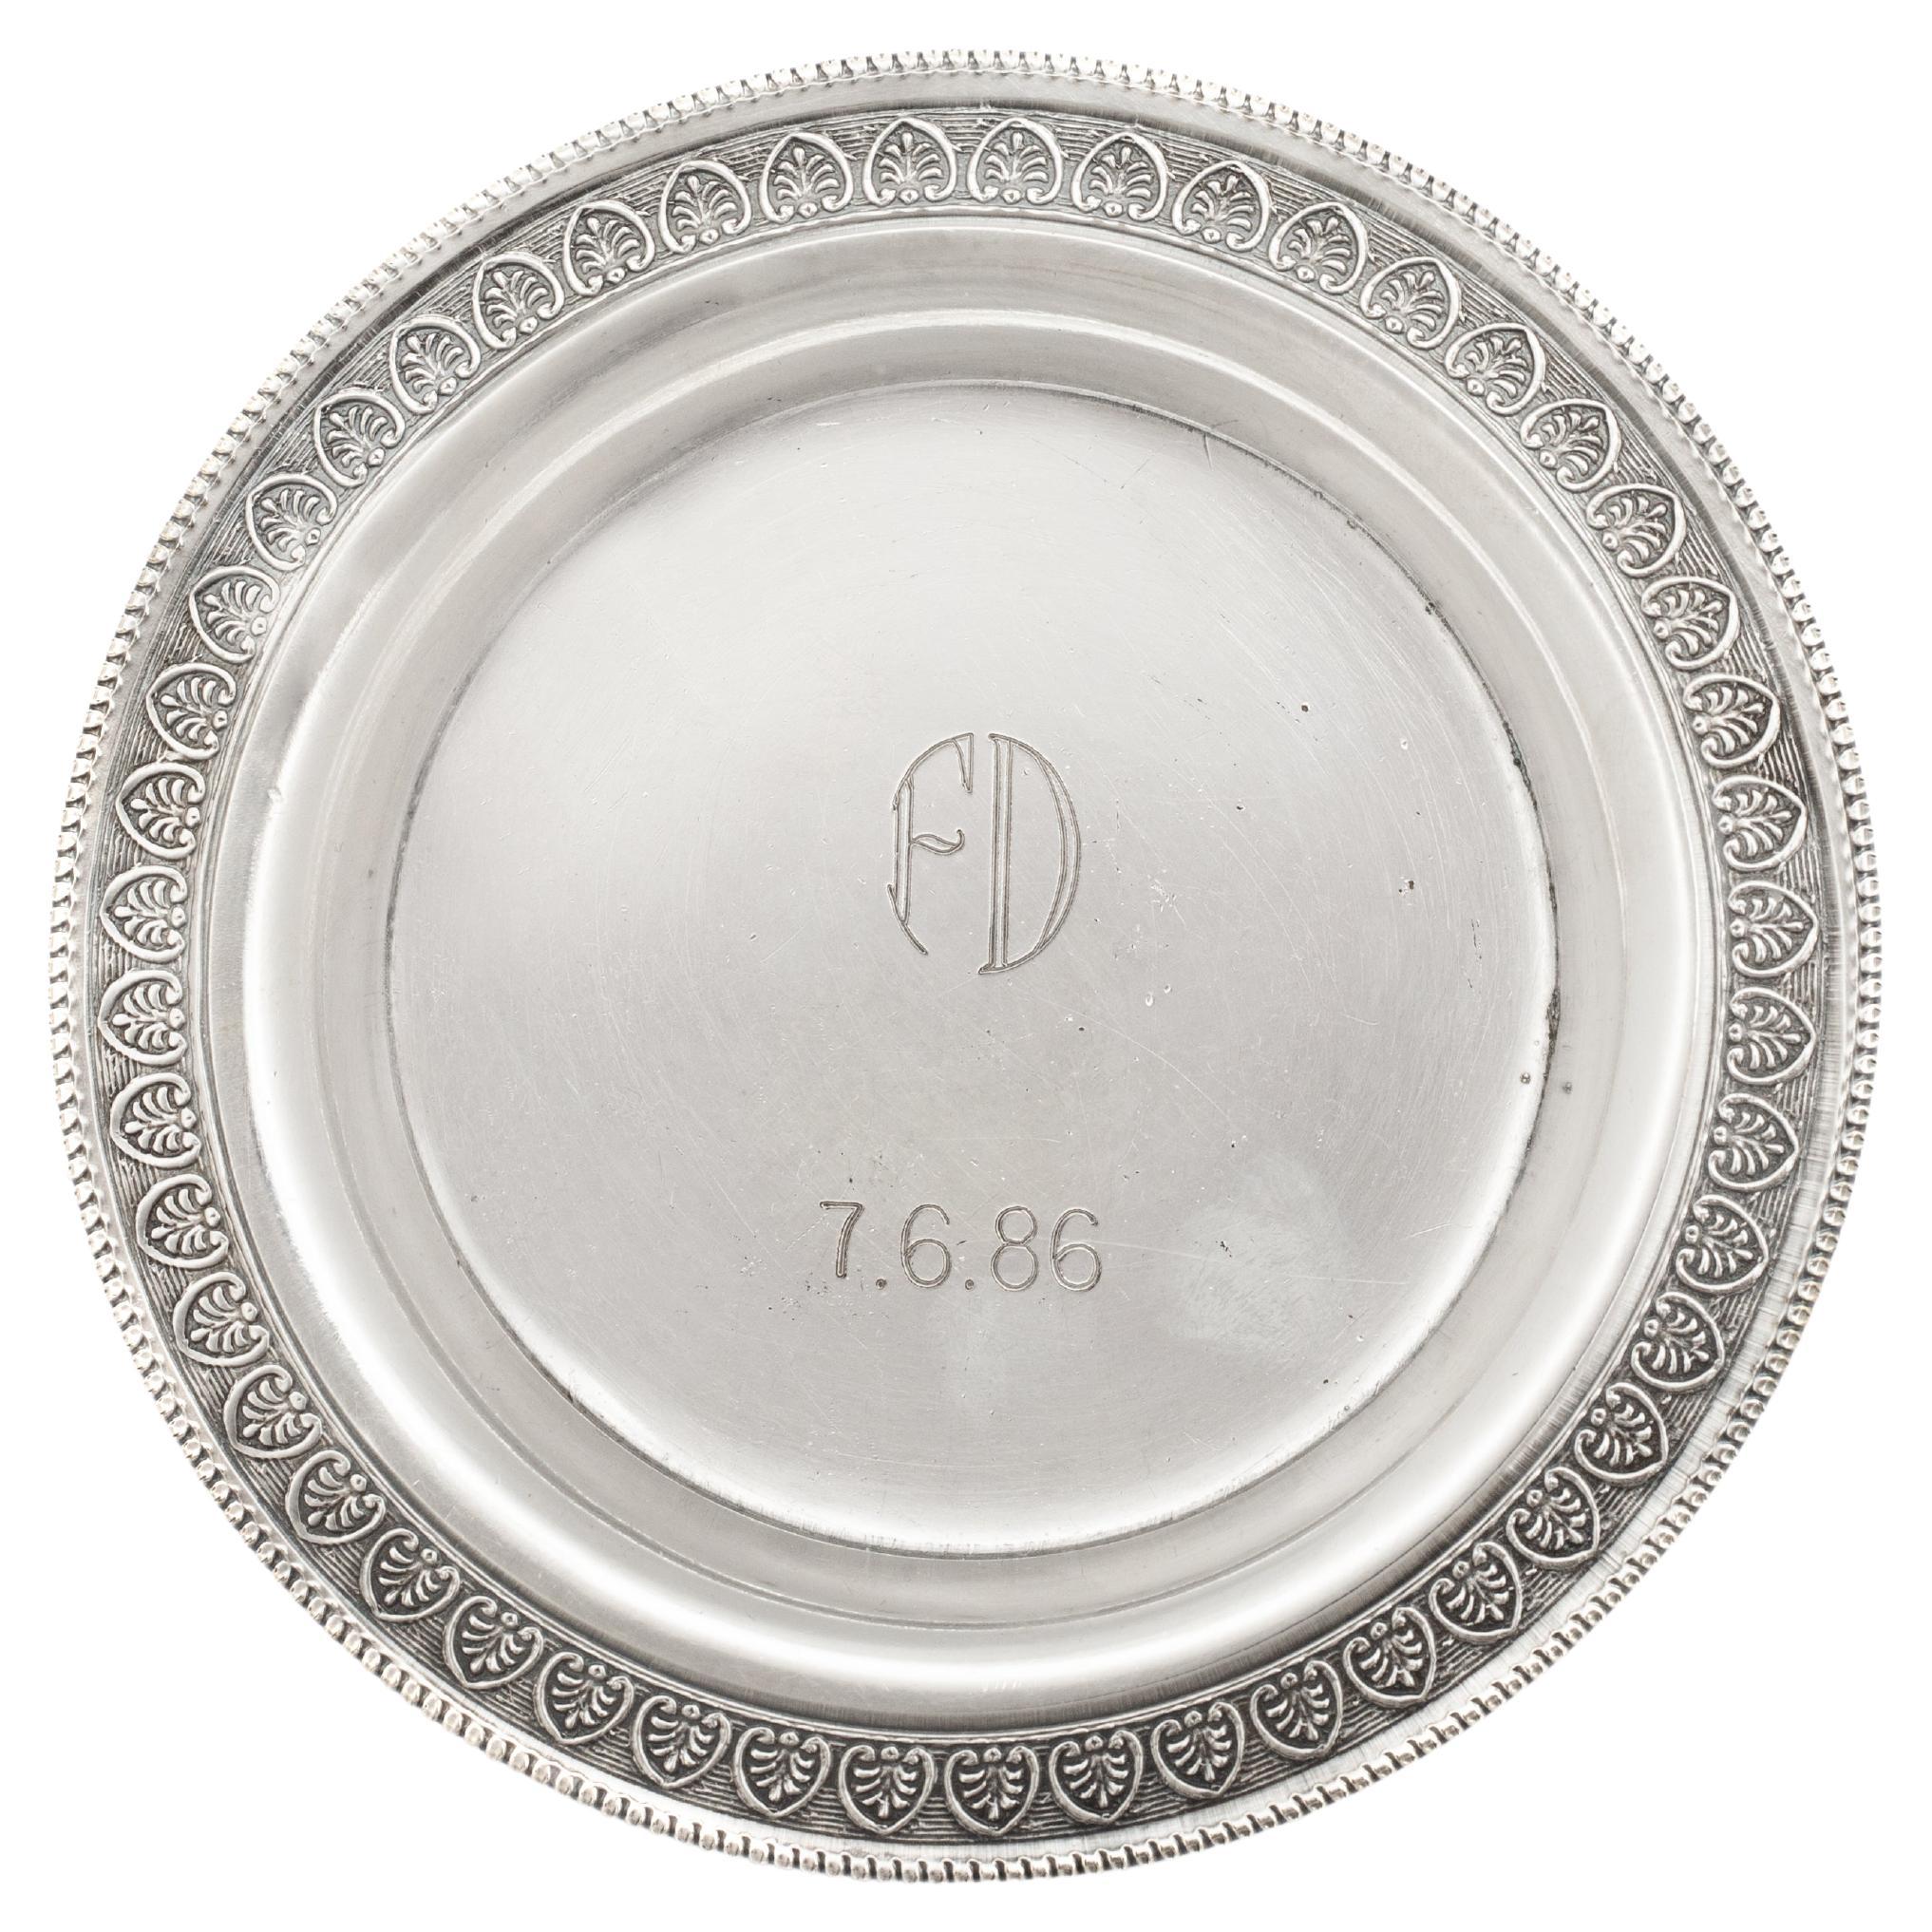 Small Engraved Plate